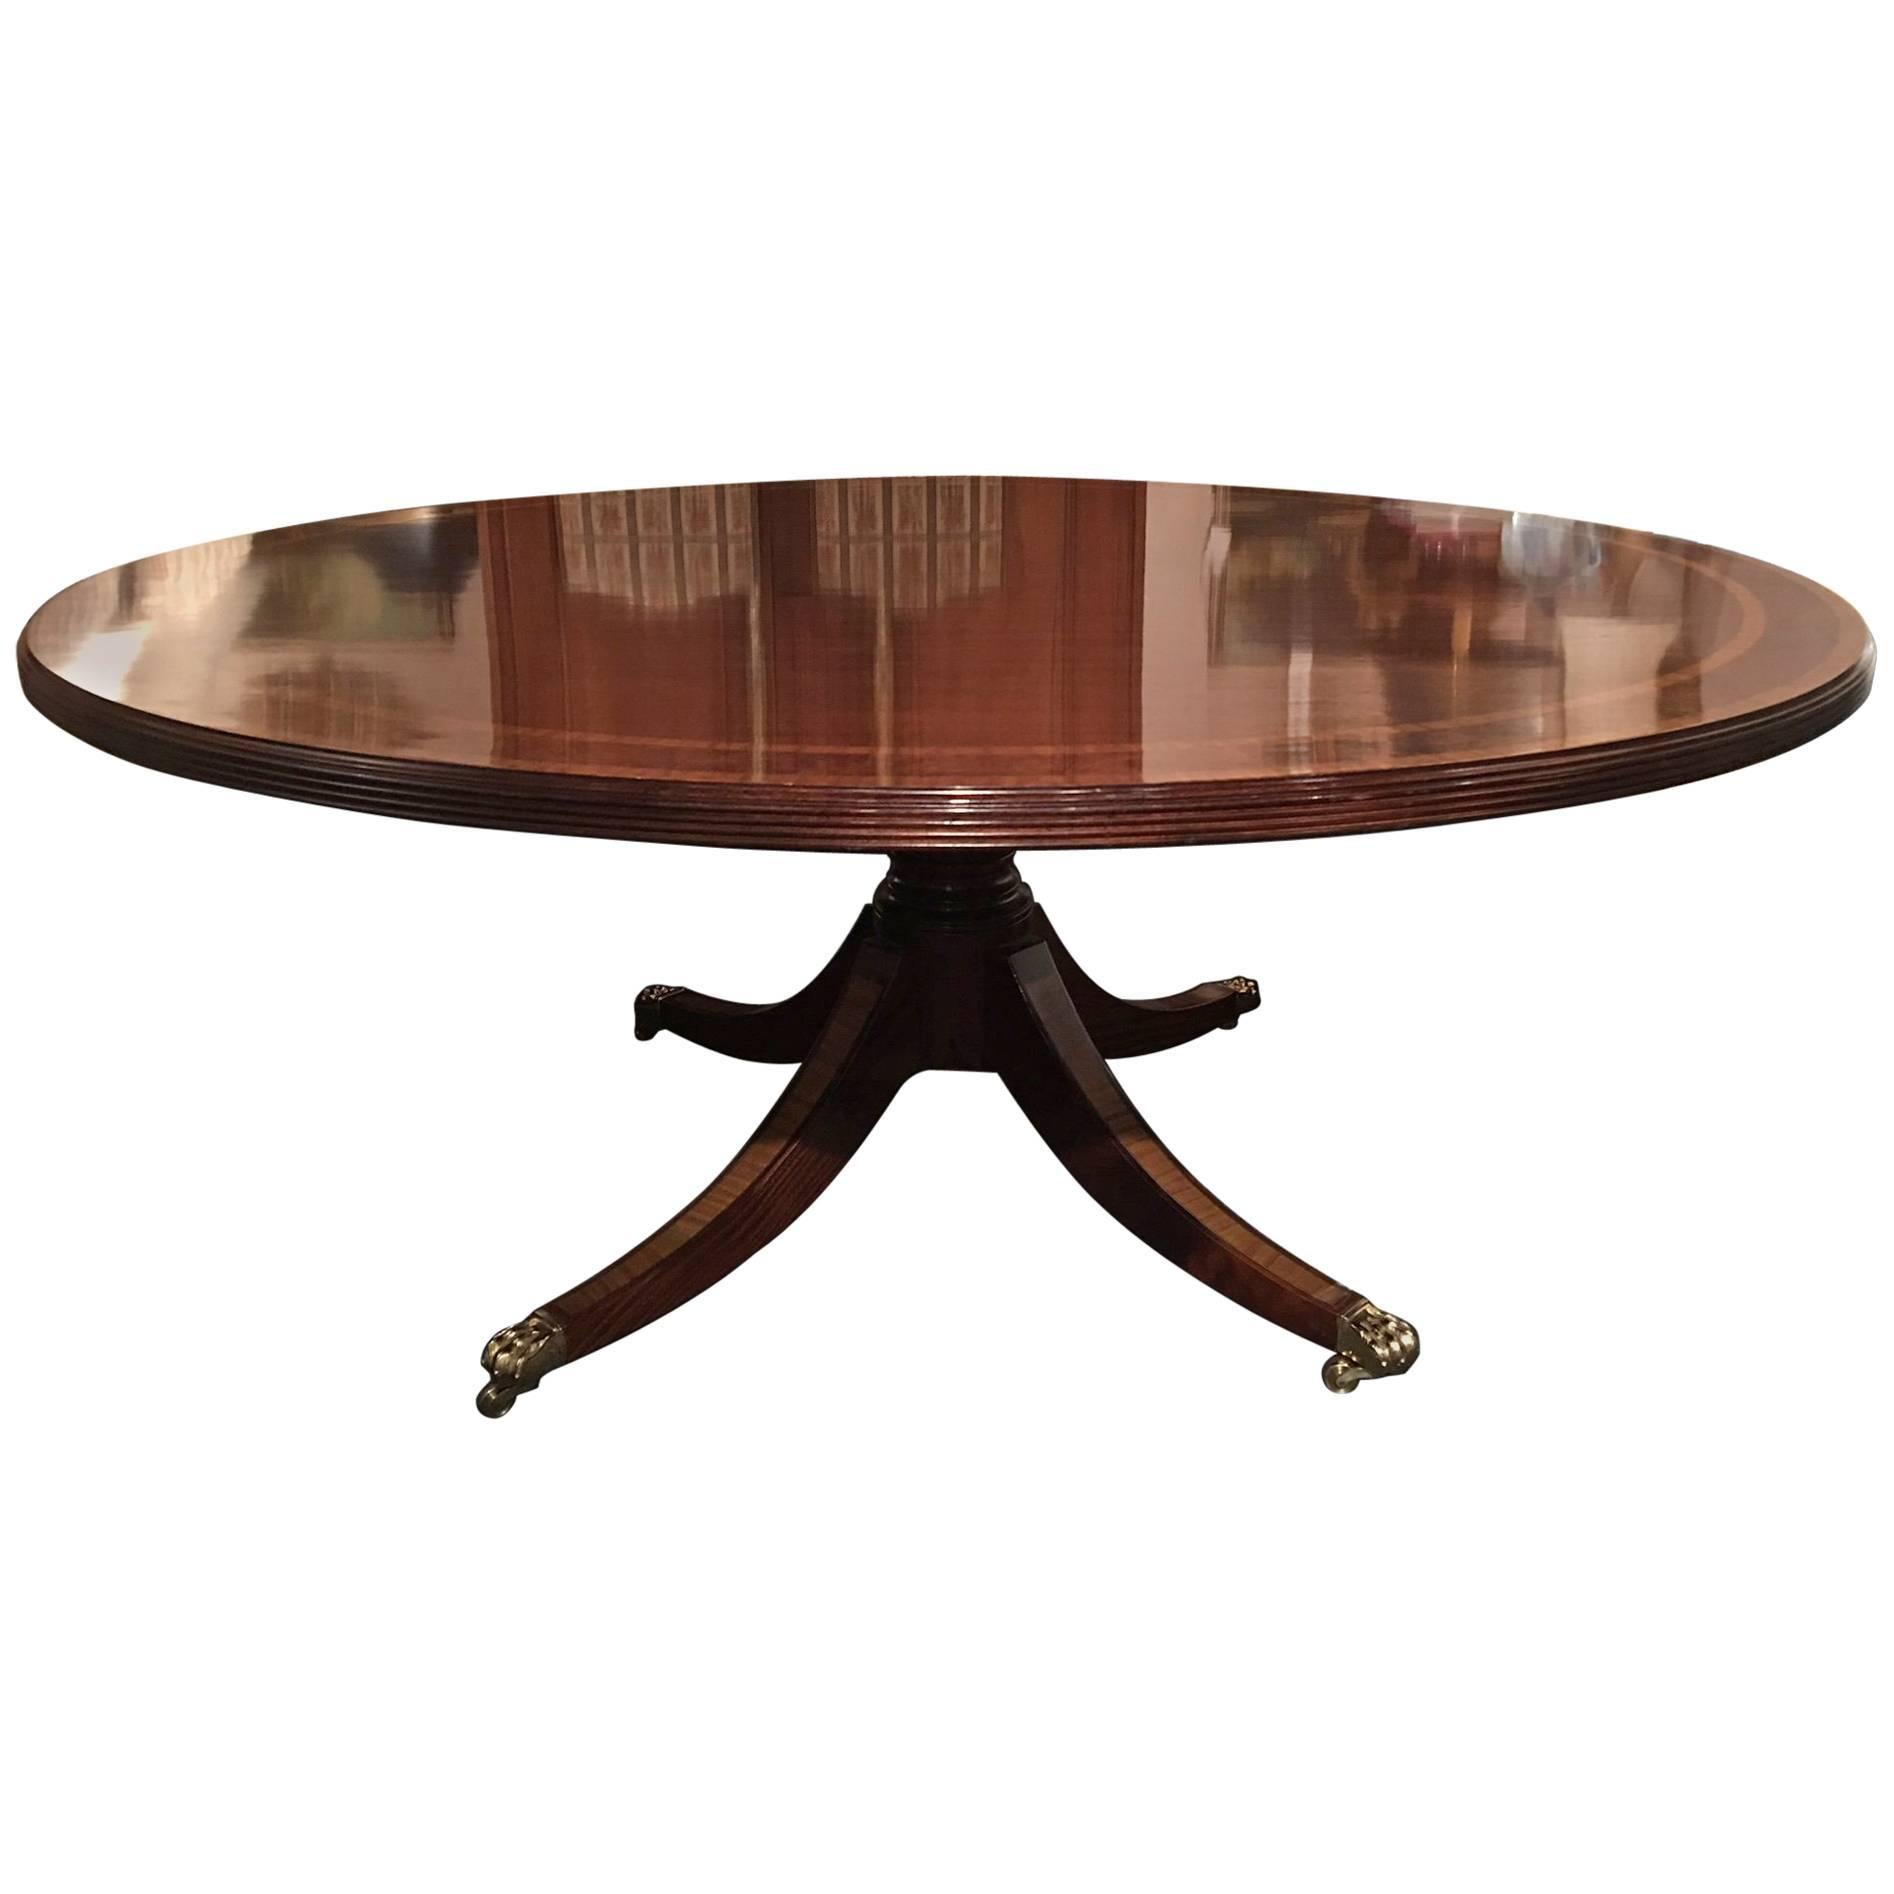 English Mahogany Round Dining Table with Inlaid Decoration, 20th Century